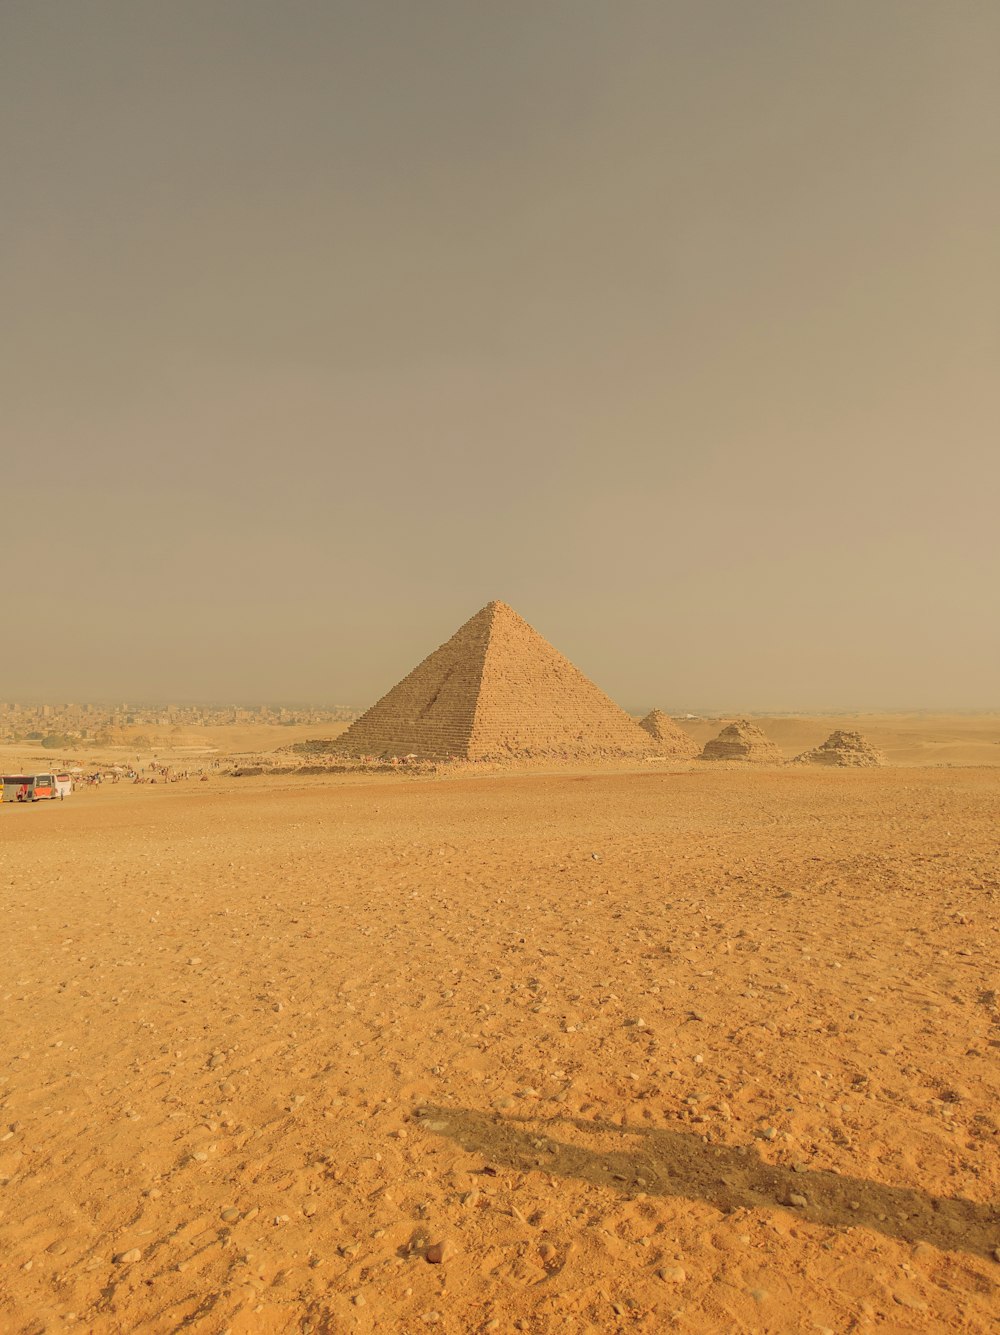 a man standing in front of a pyramid in the desert